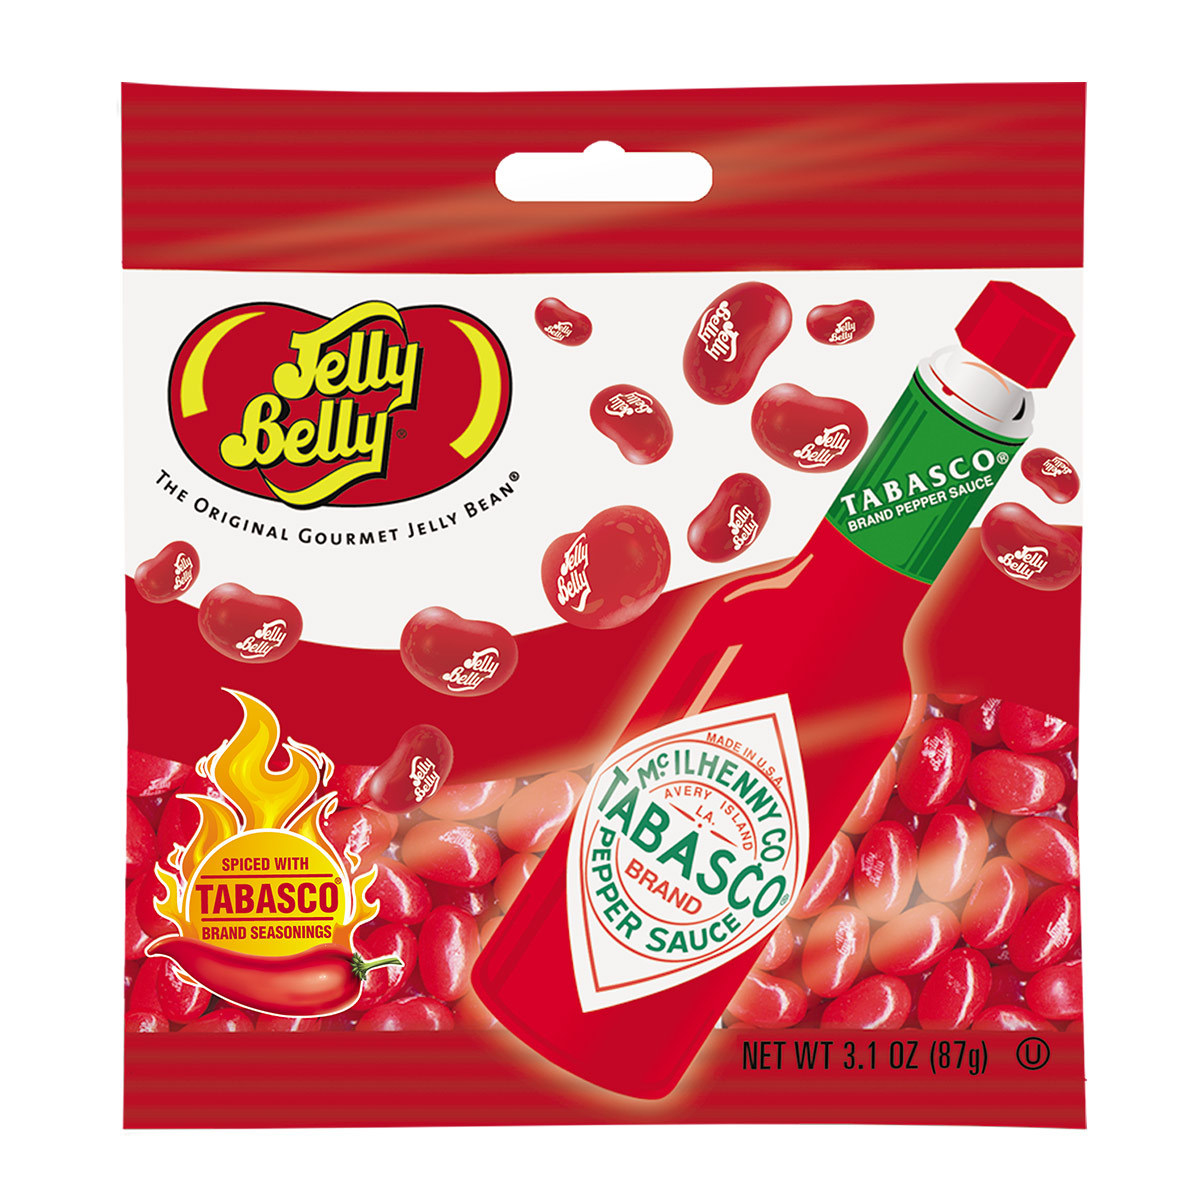 Red and white plastic bag of Tabasco jelly beans